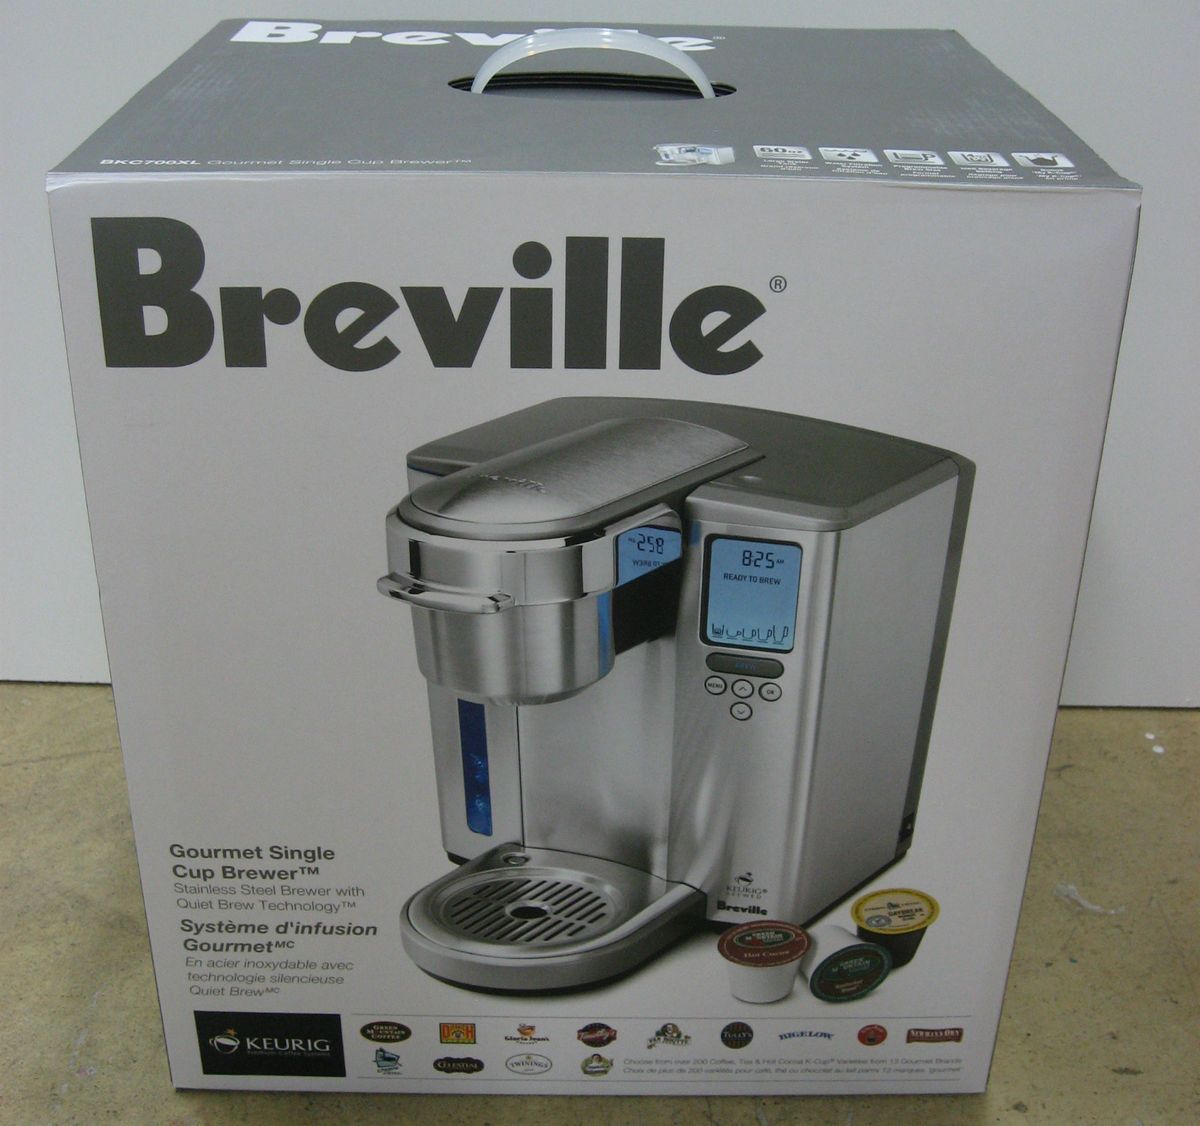 Out of the Box: Breville Gourmet Single Cup Brewer BKC700XL 